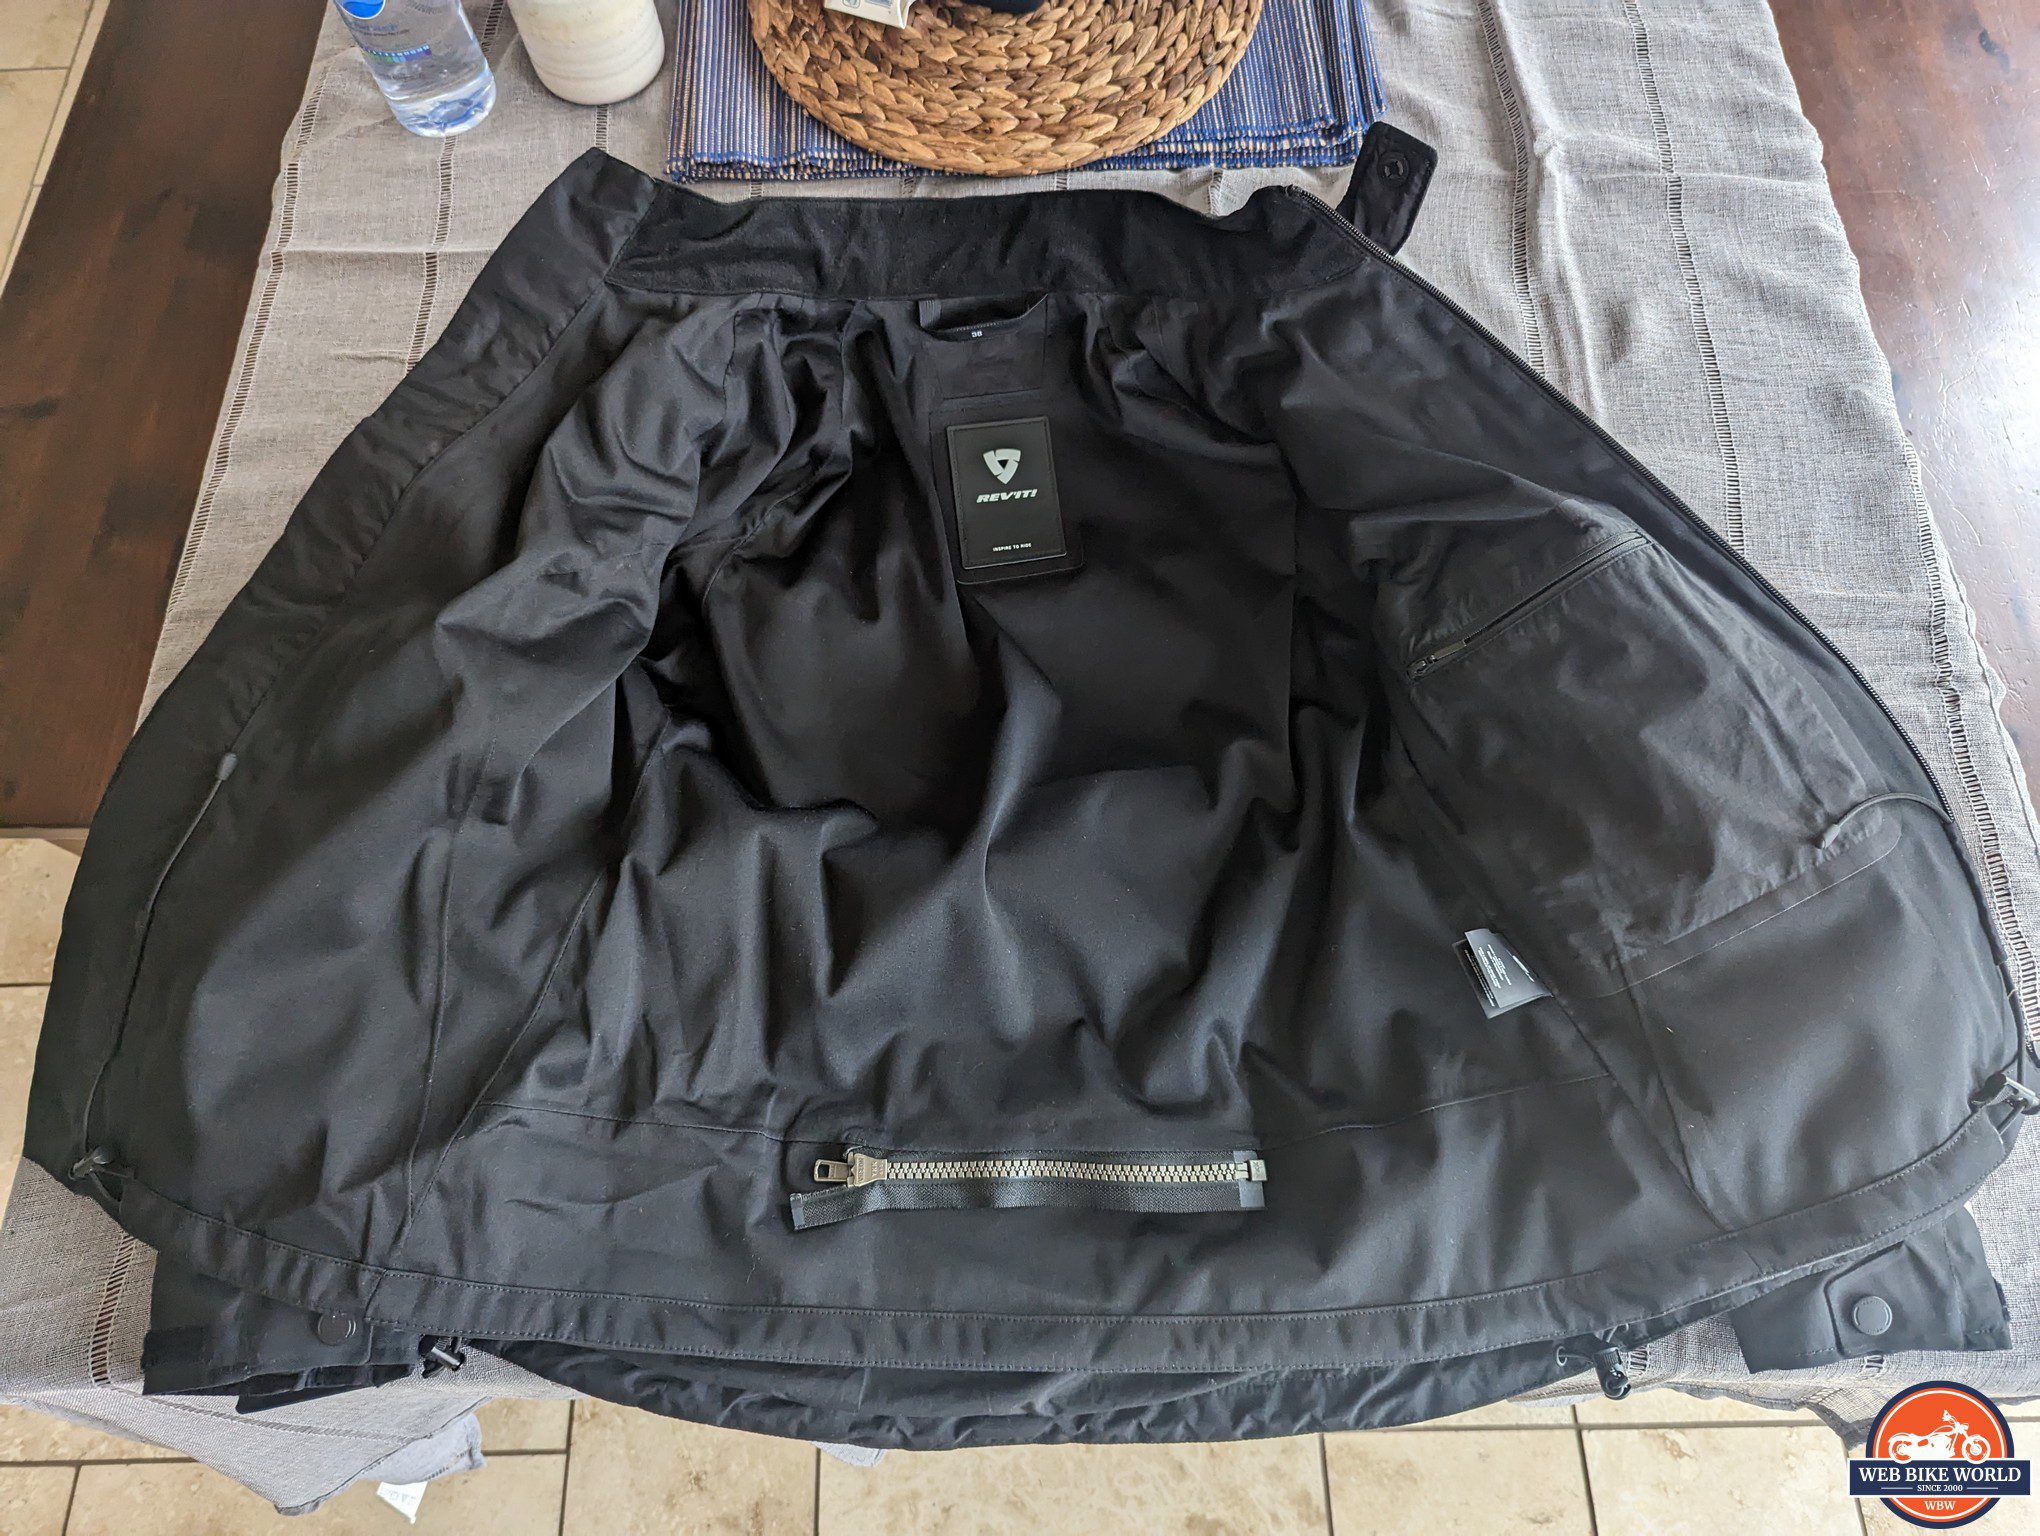 The inner side of the Thermal liner. Shows an additional trouser zipper.